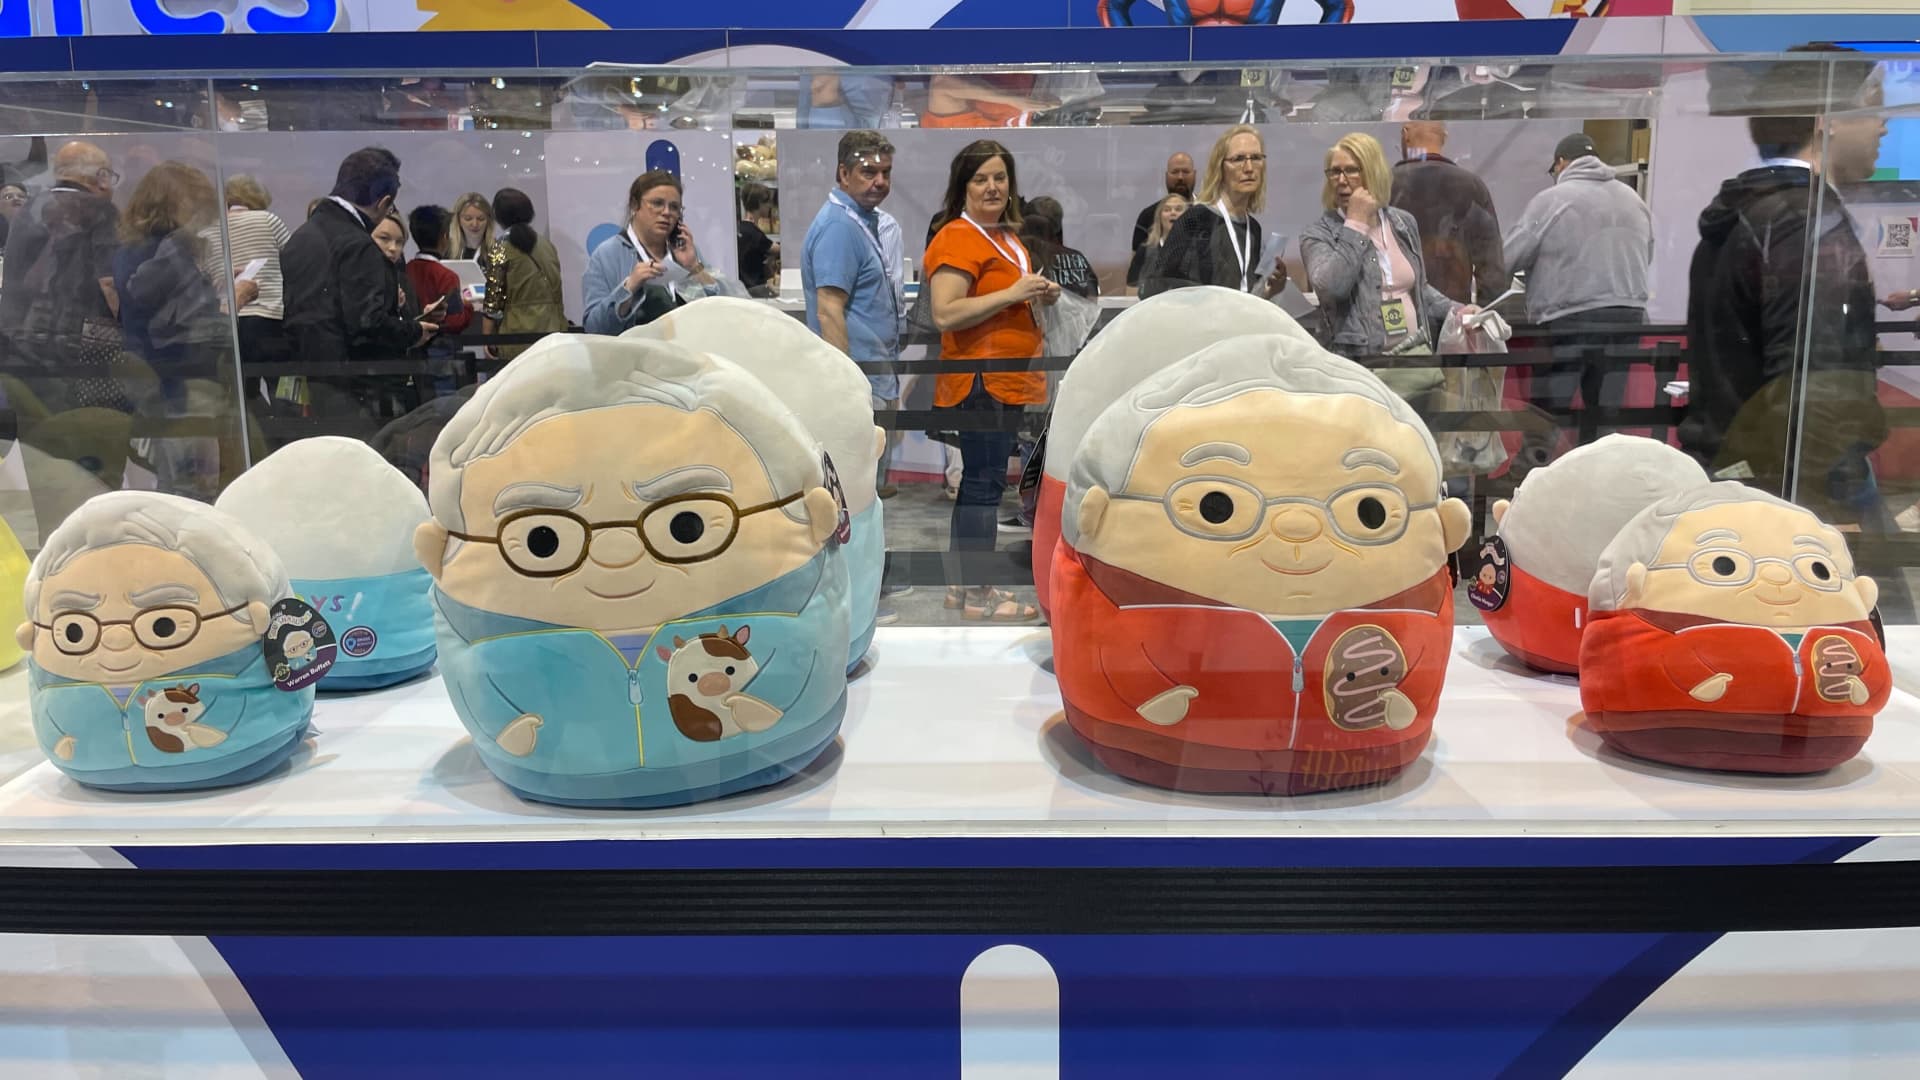 Warren Buffett’s shopping extravaganza kicks off with Squishmallows pit, 'Poor Charlie’s Almanack'